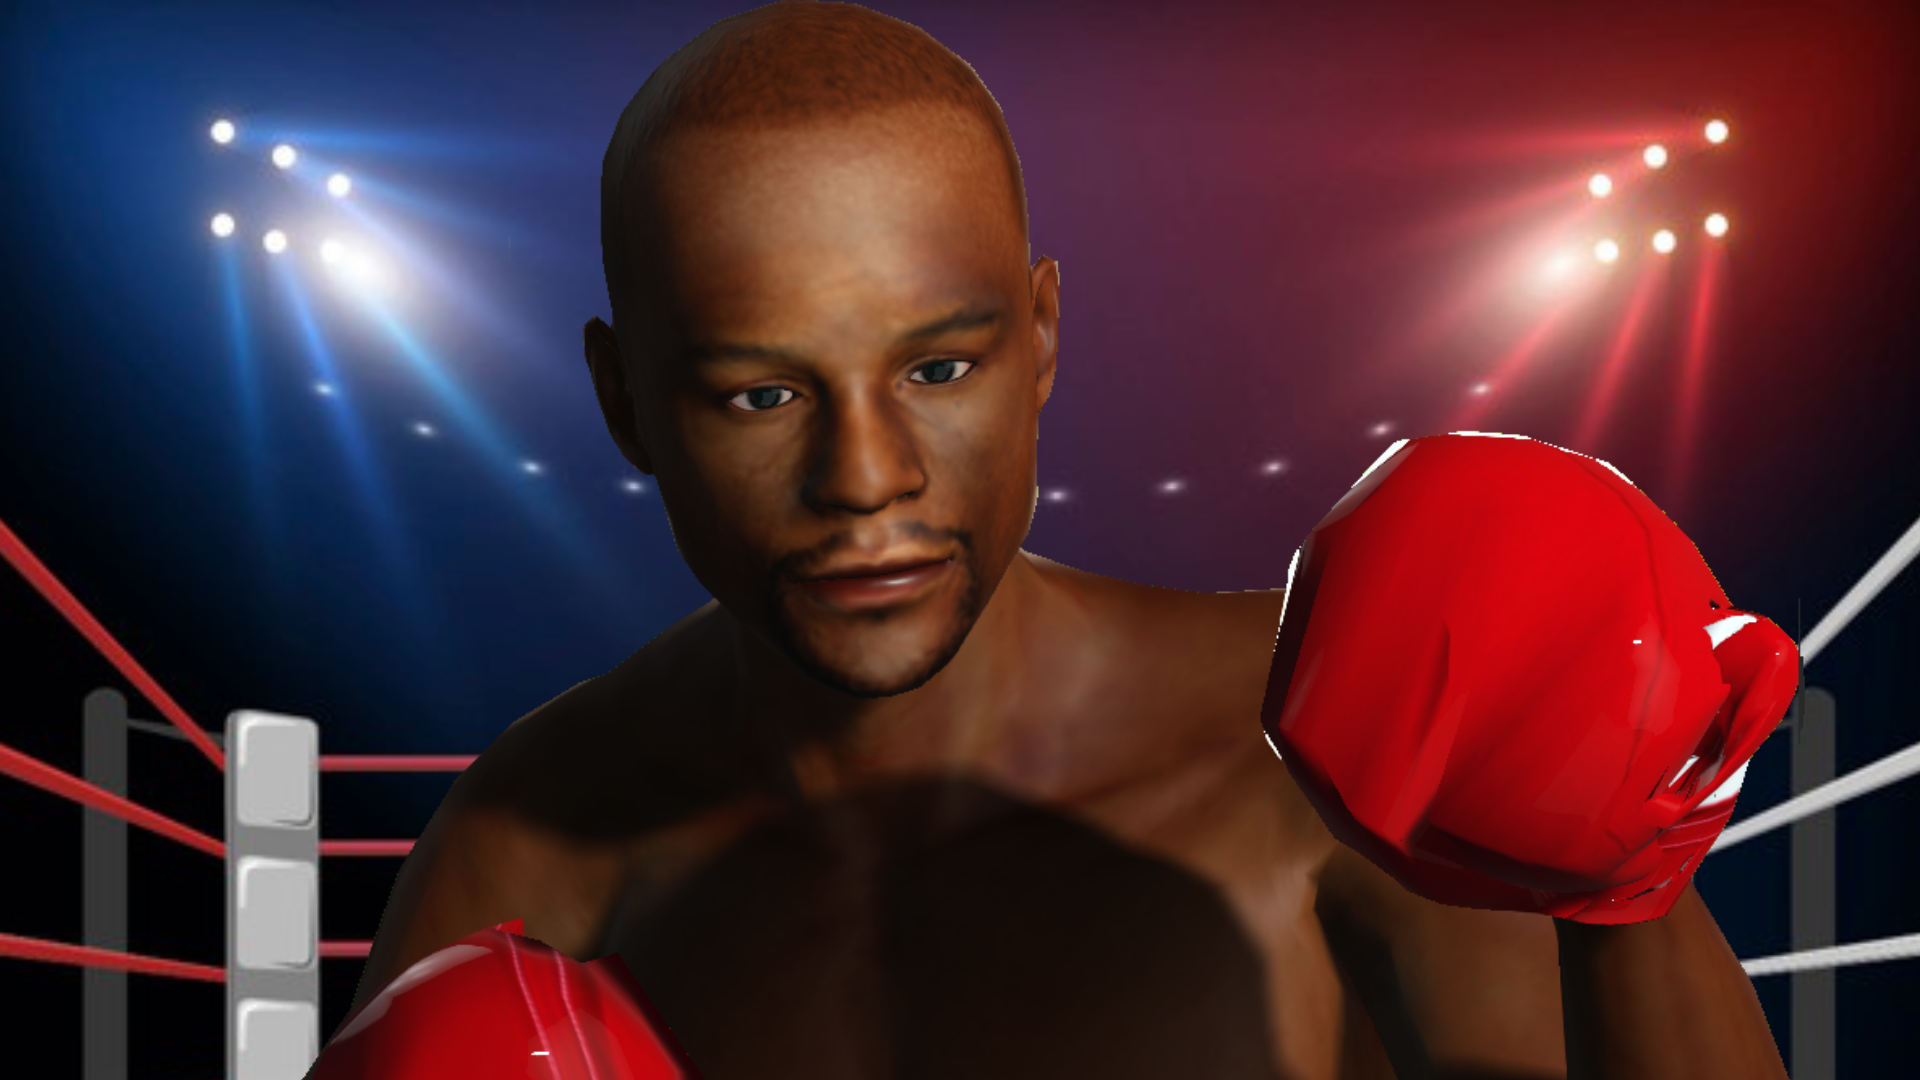 Paul v. Real Boxing 2 Creed. Floyd Mayweather vector.